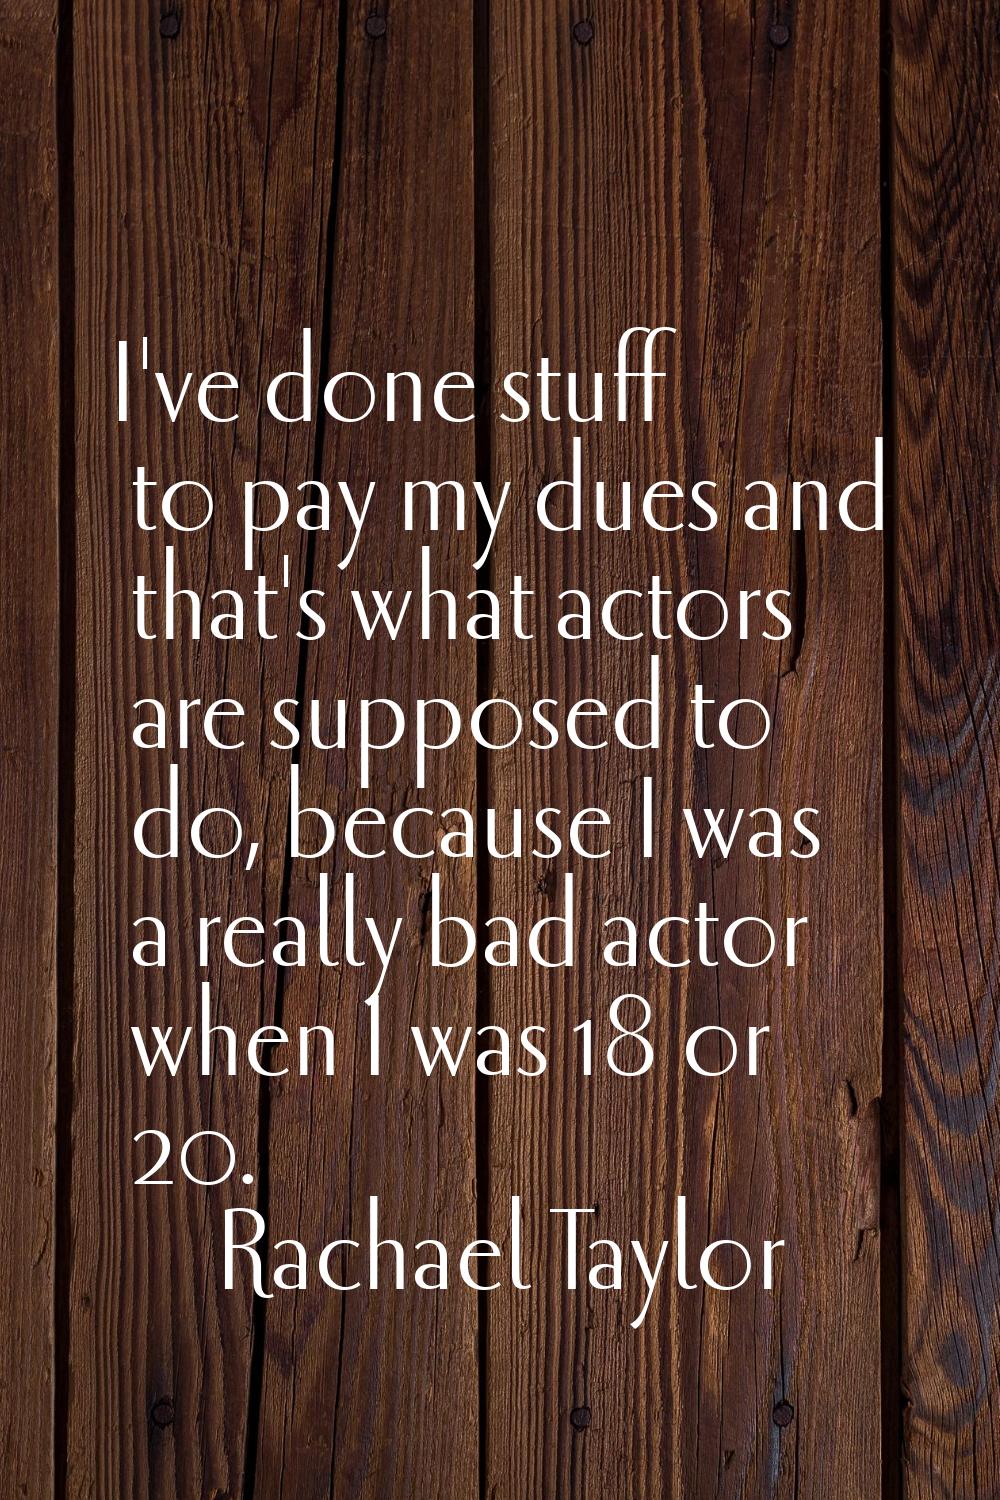 I've done stuff to pay my dues and that's what actors are supposed to do, because I was a really ba